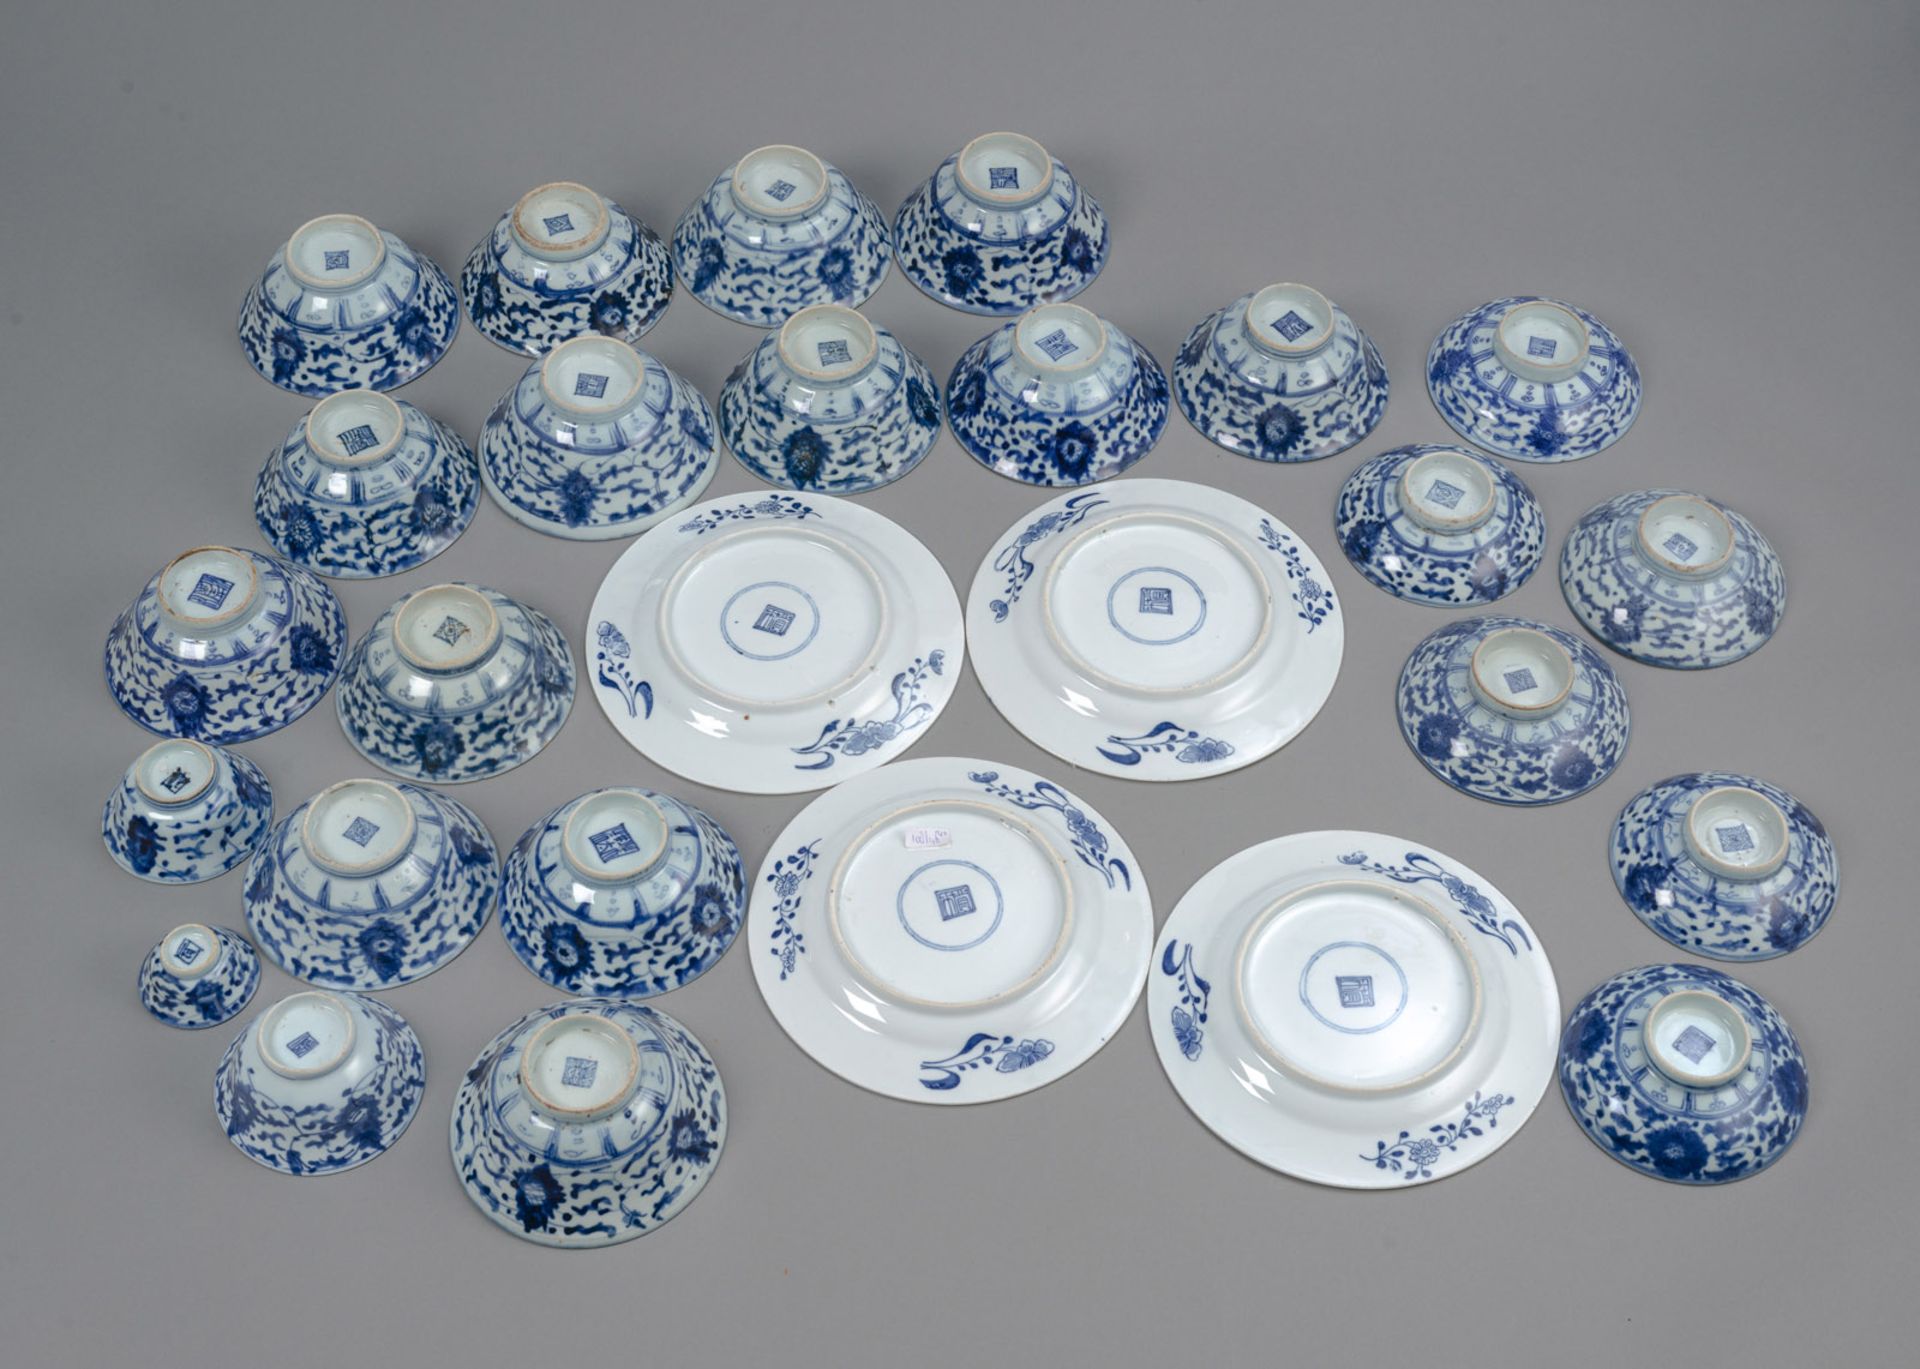 A GROUP OF UNDERGLAZE-BLUE PORCELAINS: 24 BOWLS OF VARIOUS SIZES AND FOUR DISHES - Image 2 of 2